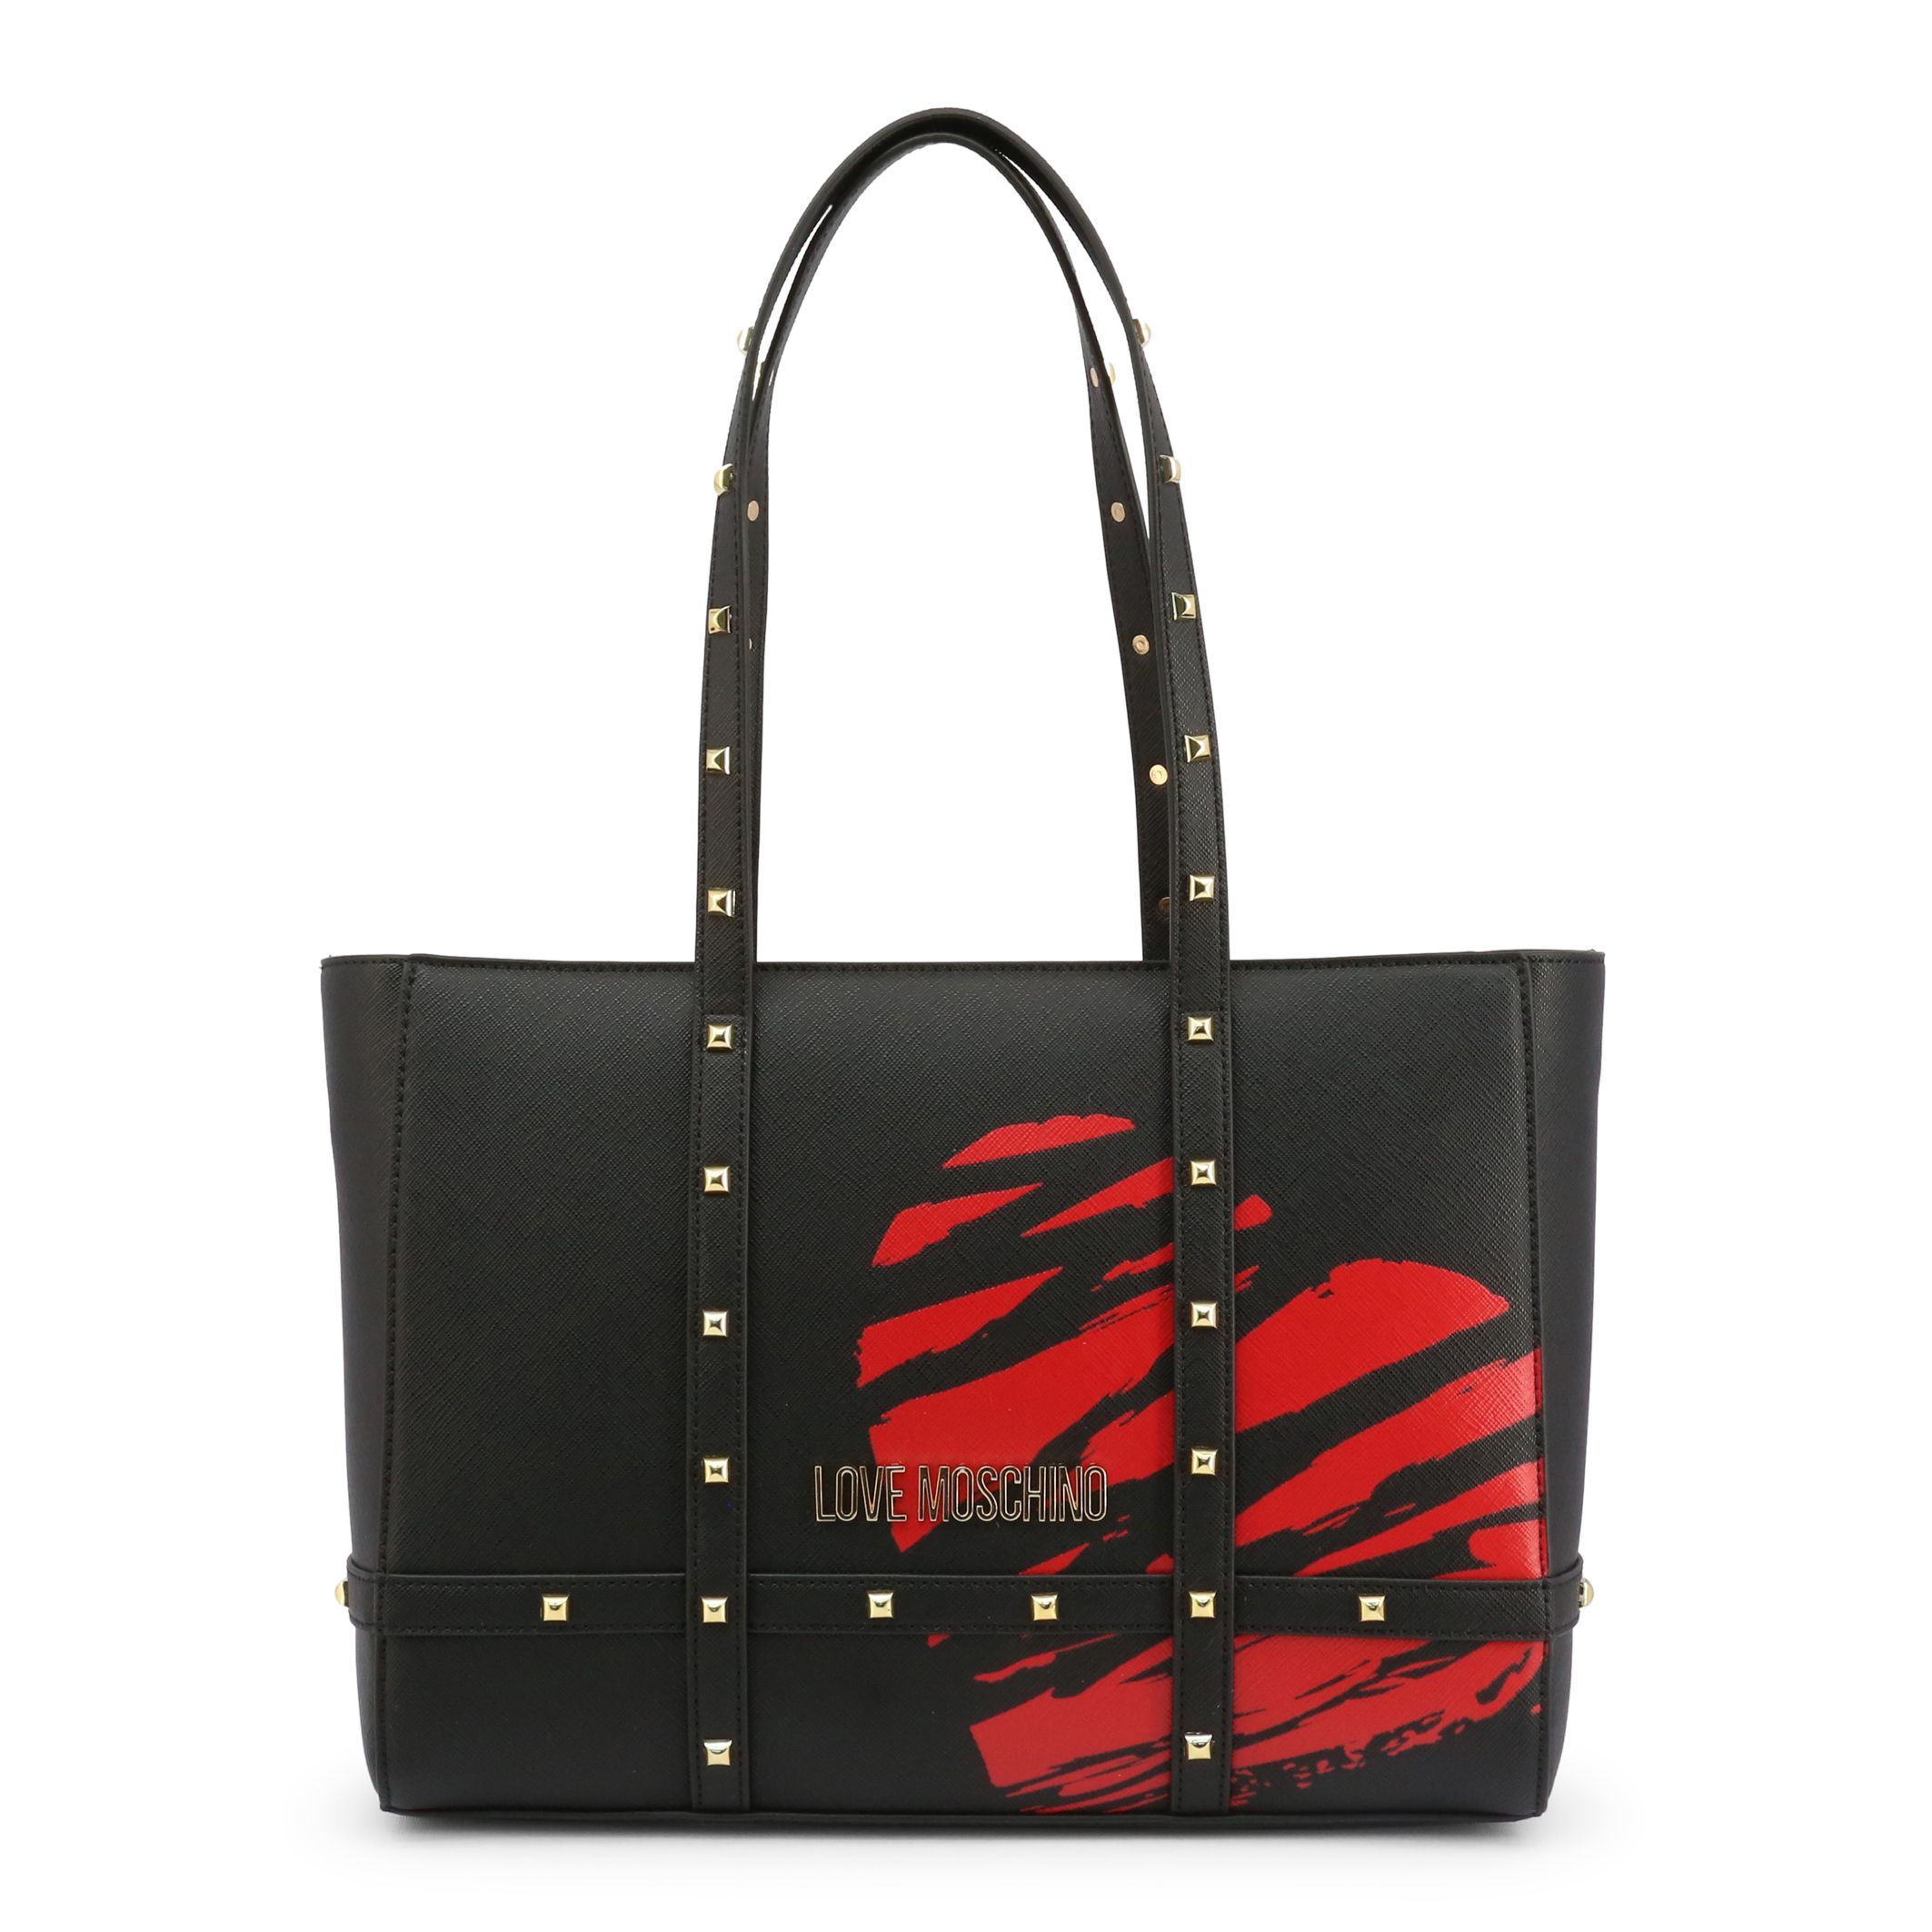 Collection: Spring/Summer Gender: Woman Type: Shoulder bag Material: polyurethane Main fastening: zip Handles: 2 handles Inside: lined, 1 compartment Internal pockets: 2 Width cm: 33 Height cm: 25 Depth cm: 7 Details: with studs, dustbag included, visible logo